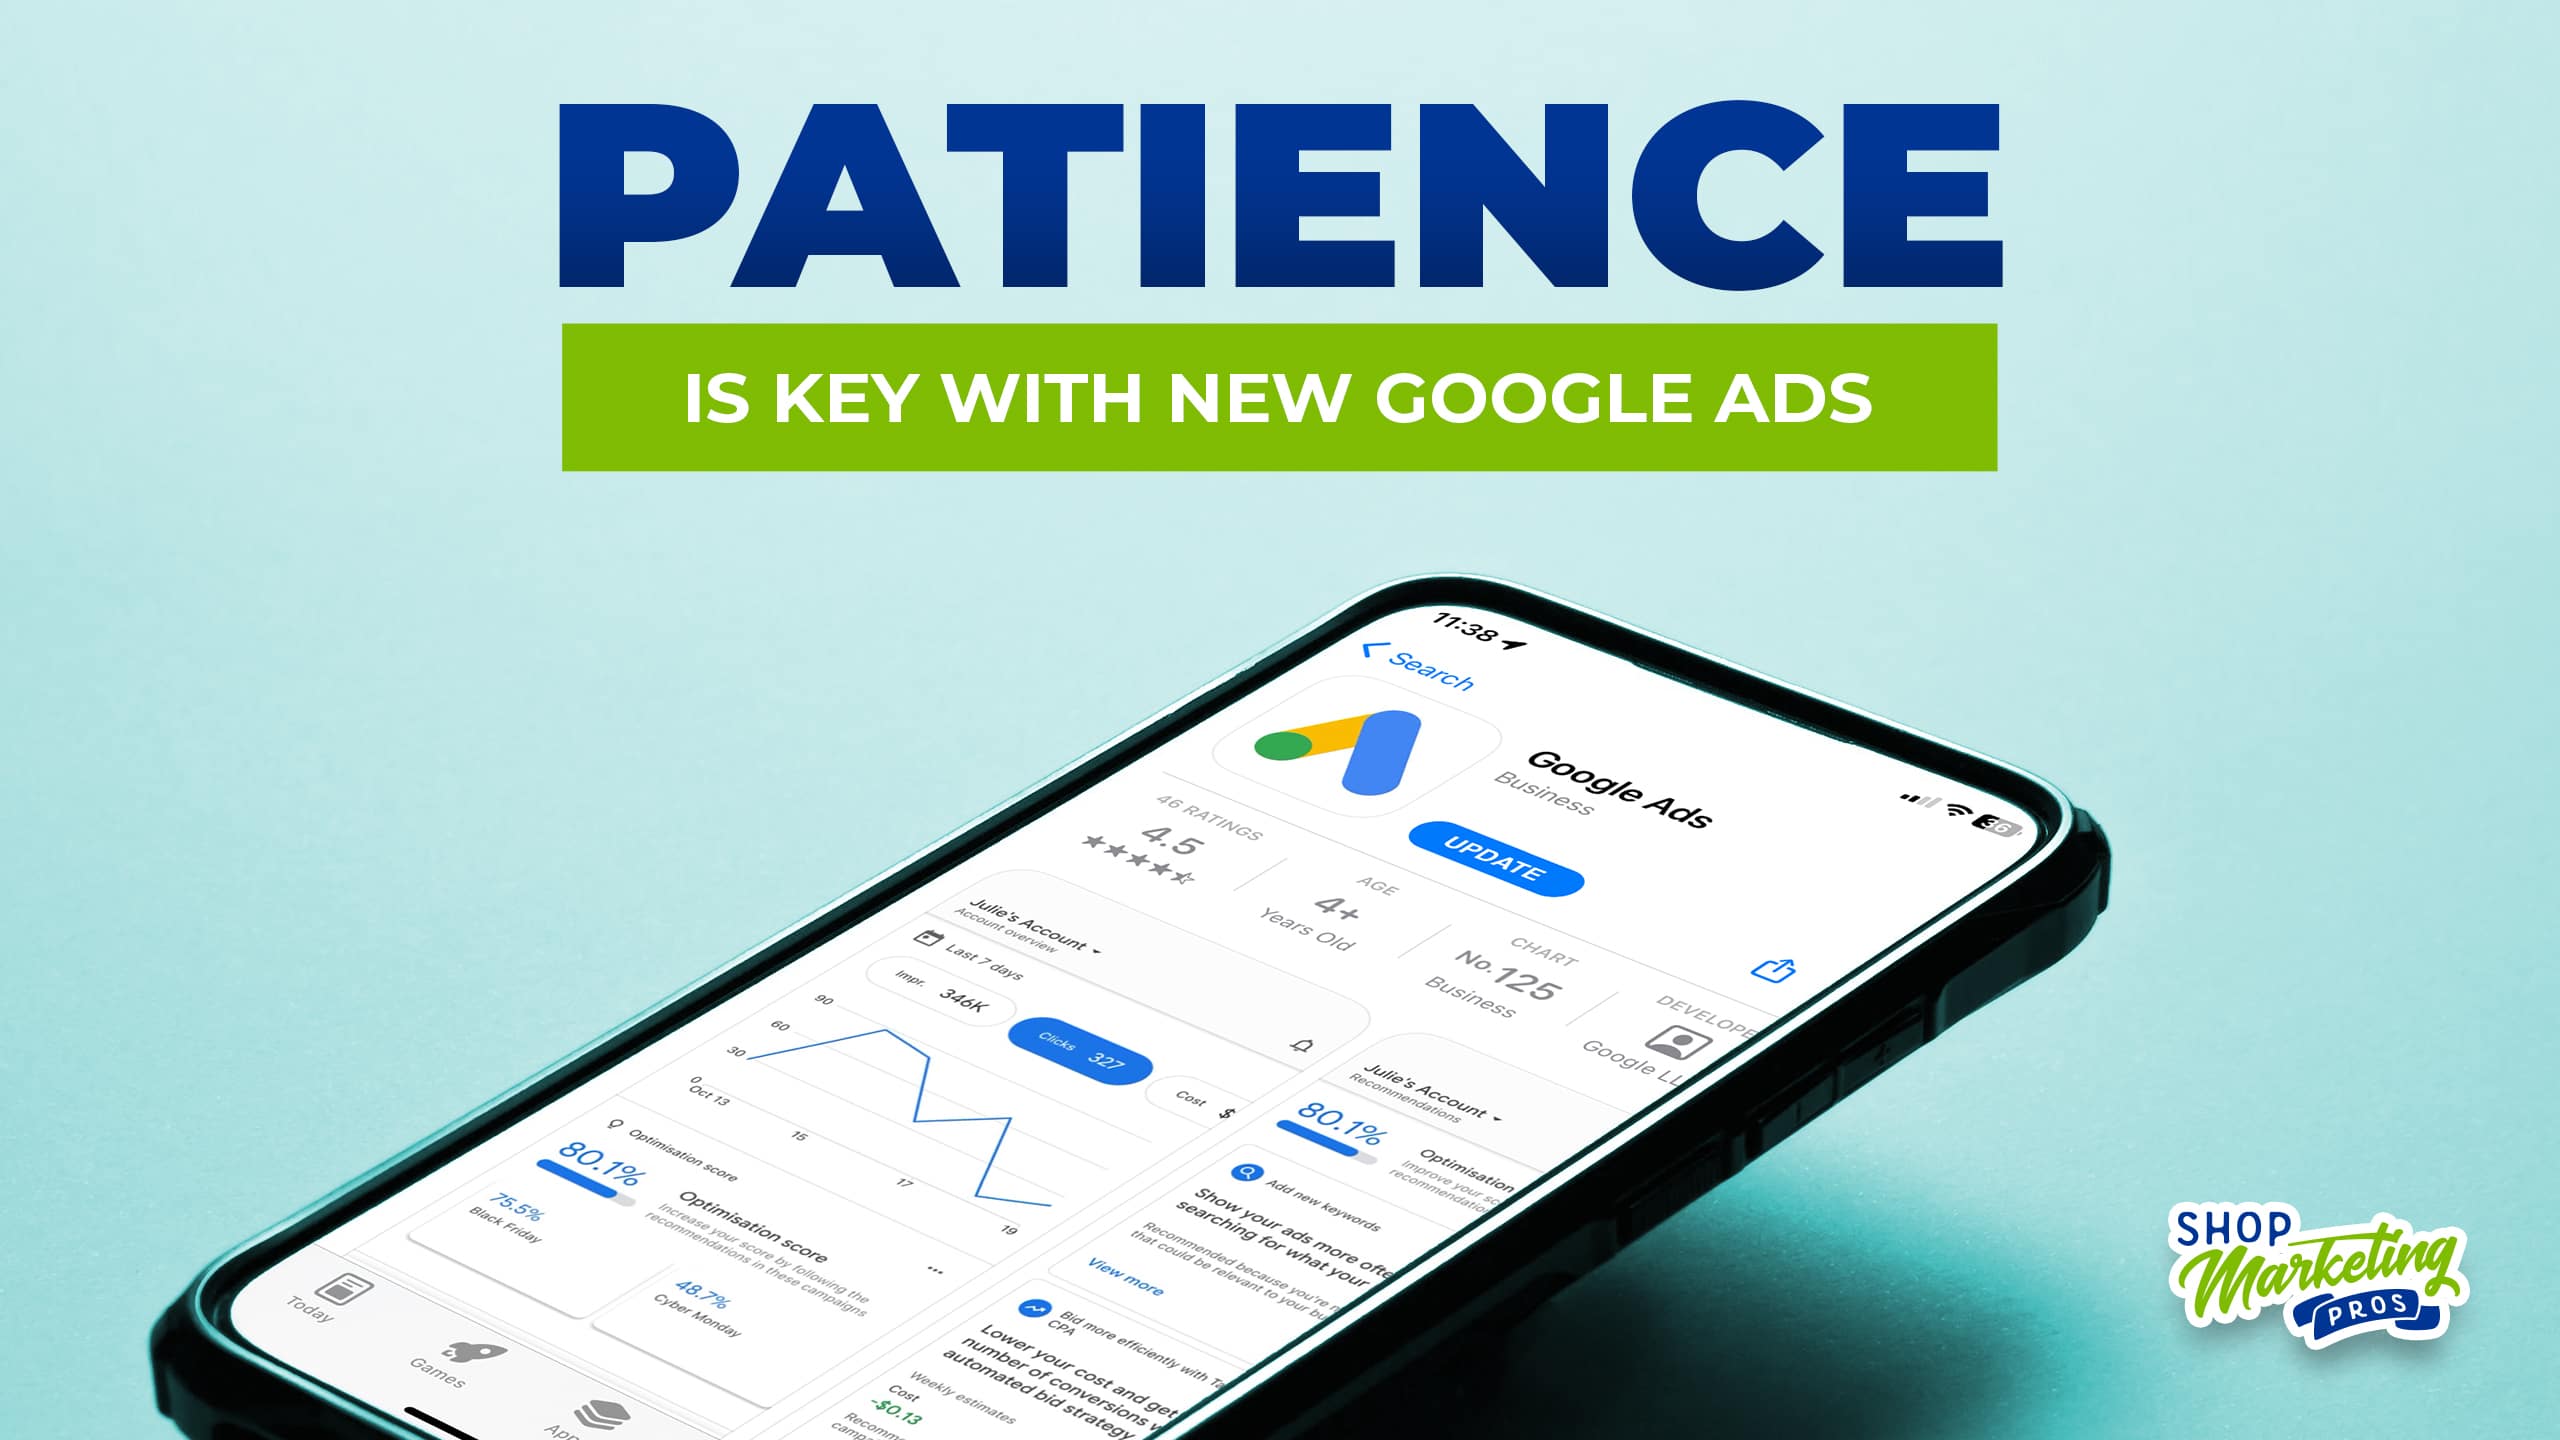 Smartphone with Google Ads display. With light-green background, title "Patience is Key with New Google Ads" on center top, and Shop Marketing Pros logo on the lower right corner.